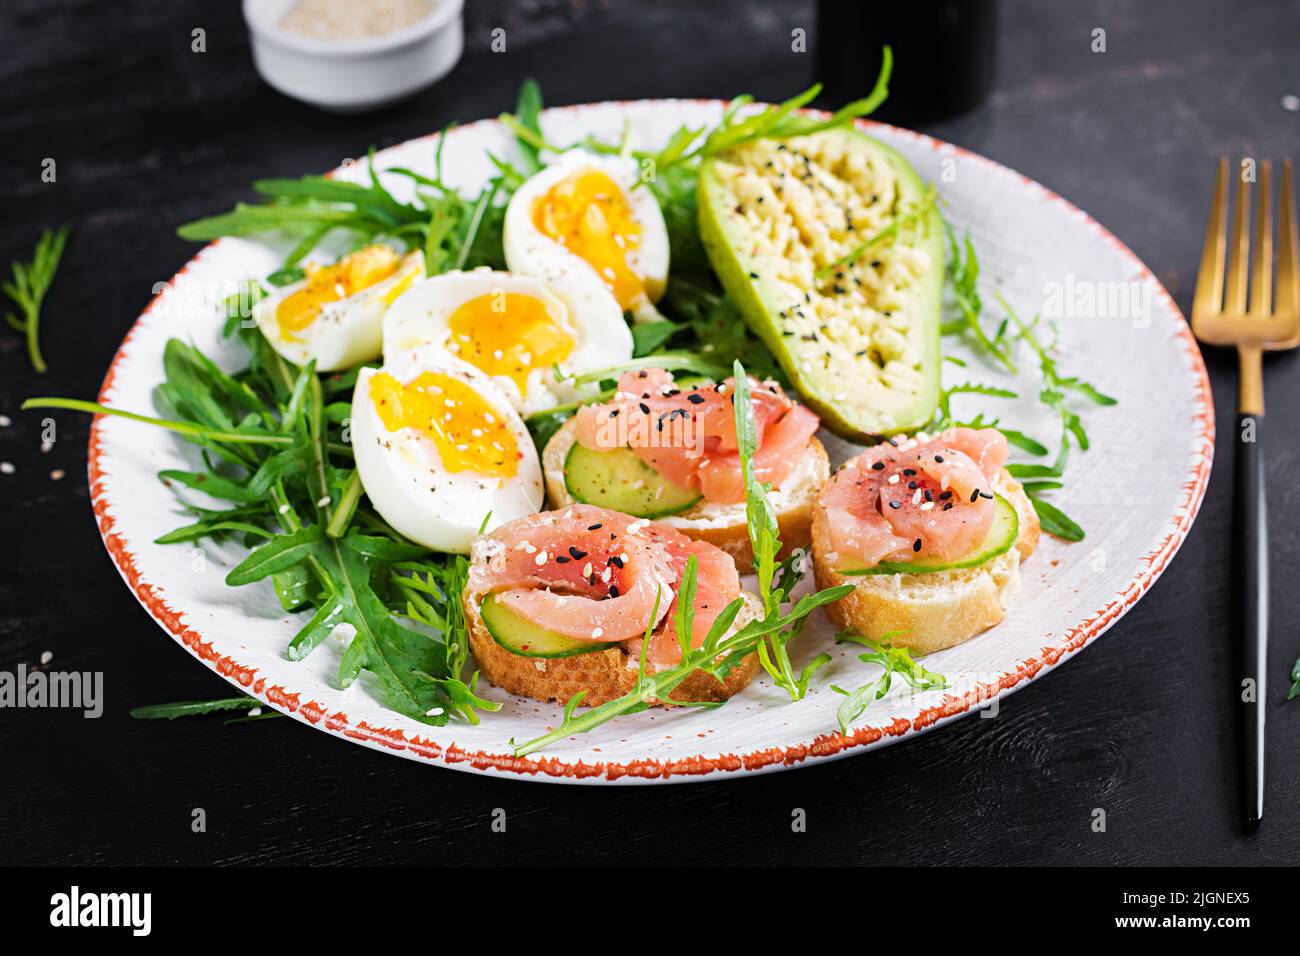 Sandwiches with salt salmon and boiled eggs and avocado. Keto, ketogenic diet breakfast or lunch. Stock Photo